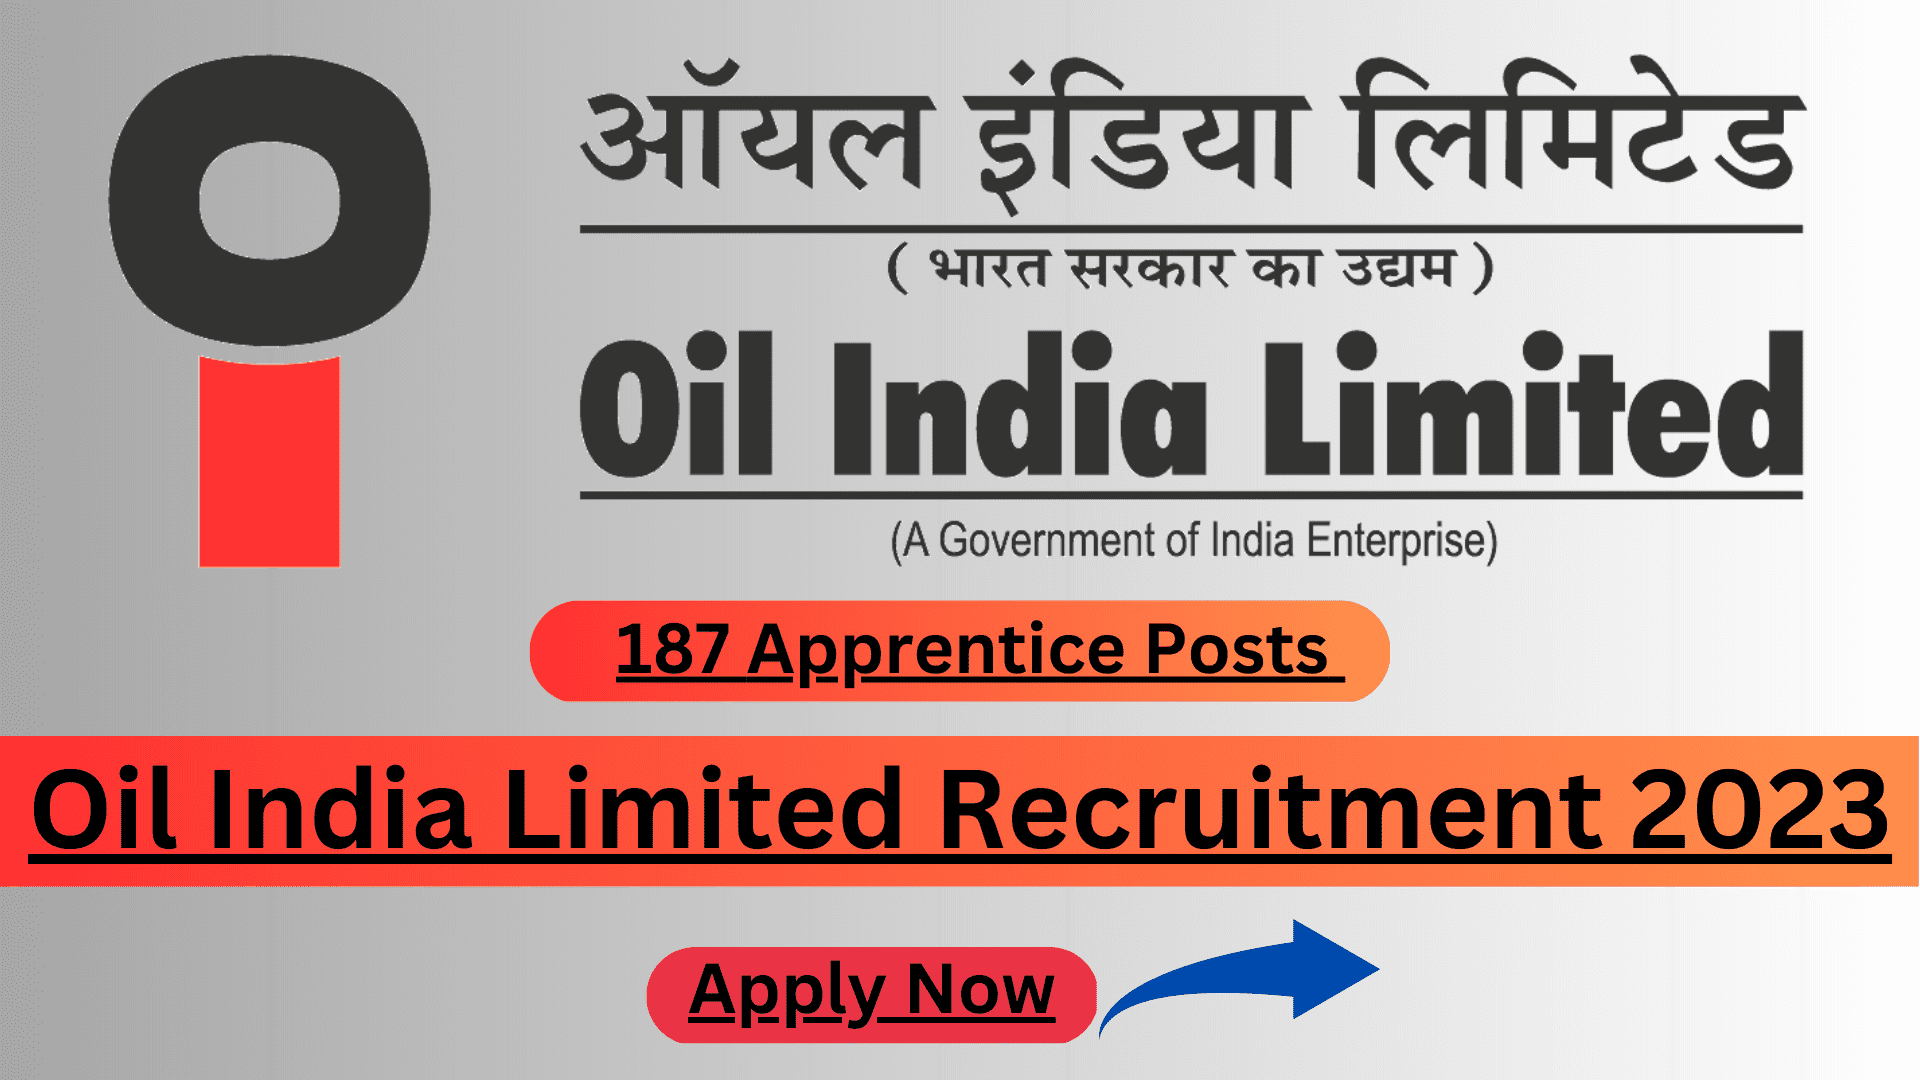 OIL India Limited Recruitment 2023